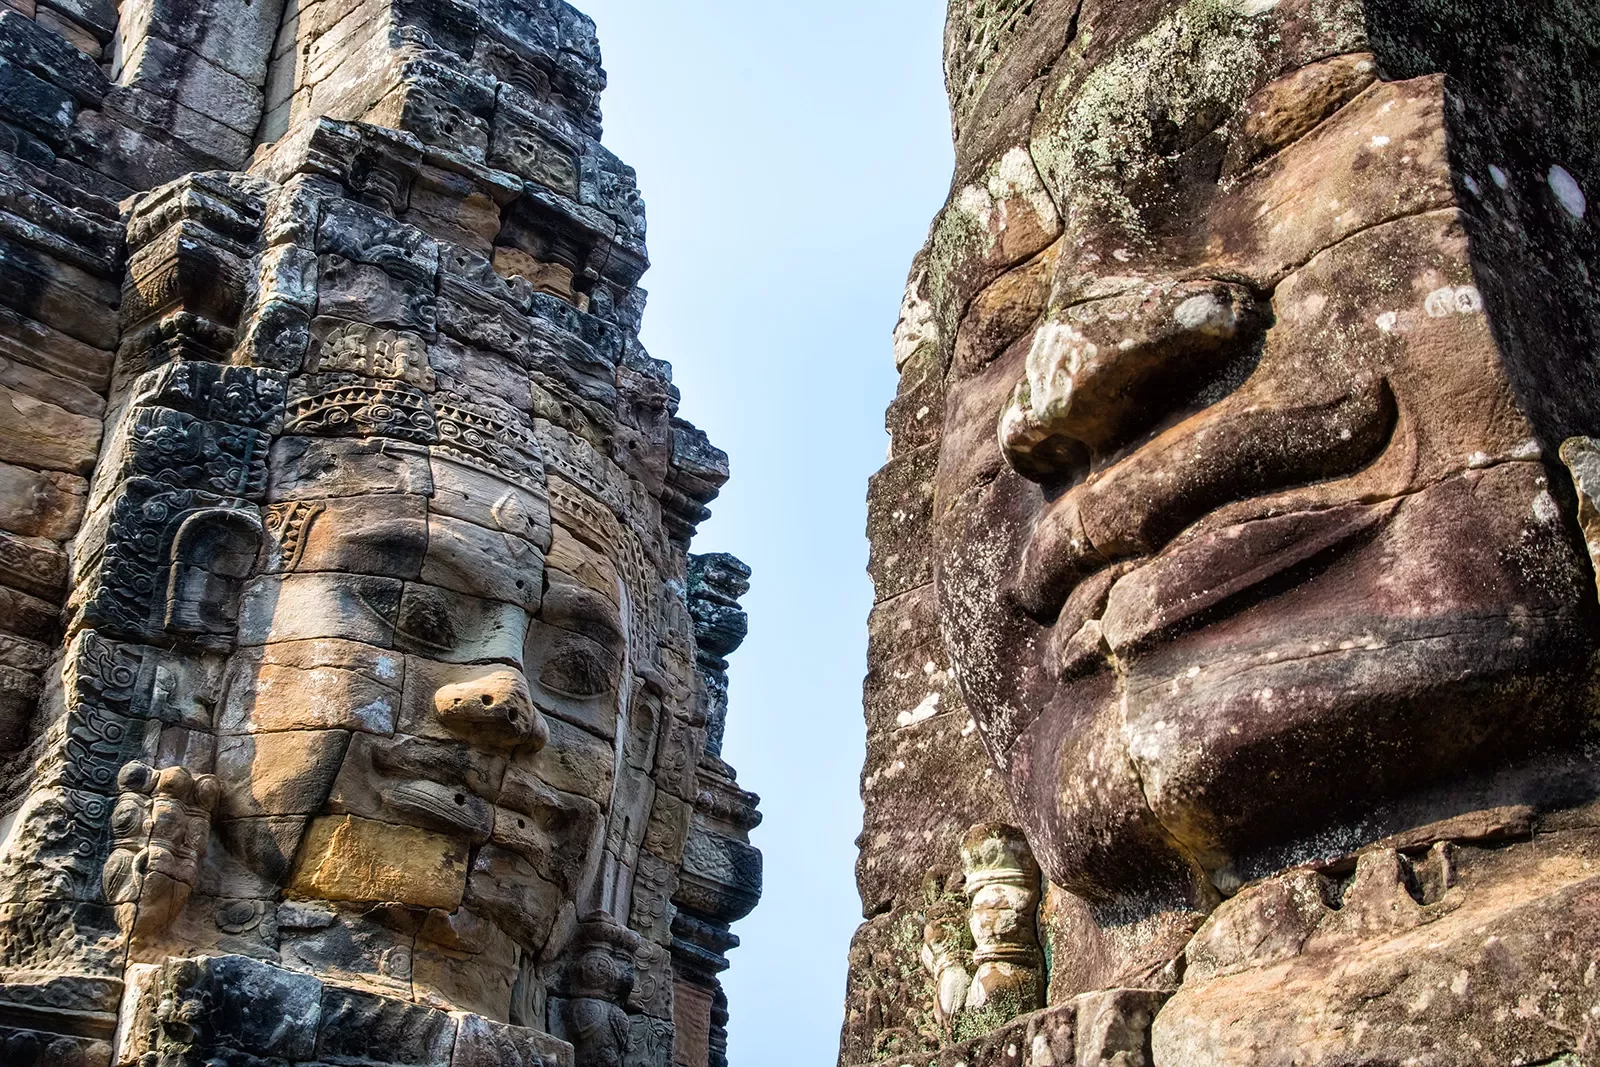 Close-up of the Bayon Temple sculpture heads.